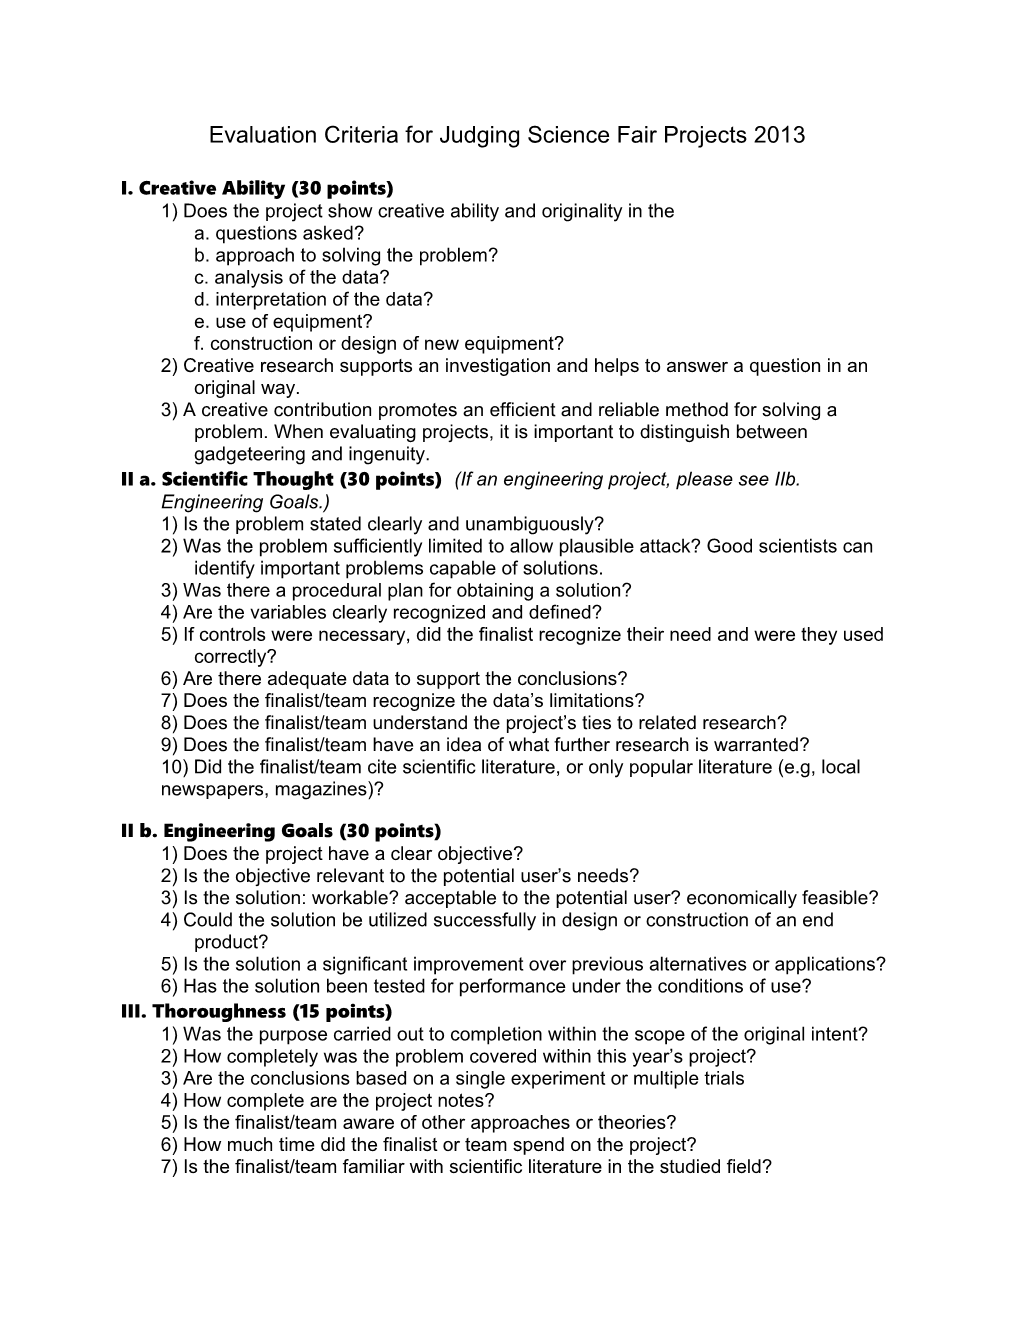 Evaluation Criteria for Judging Science Fair Projects 2013